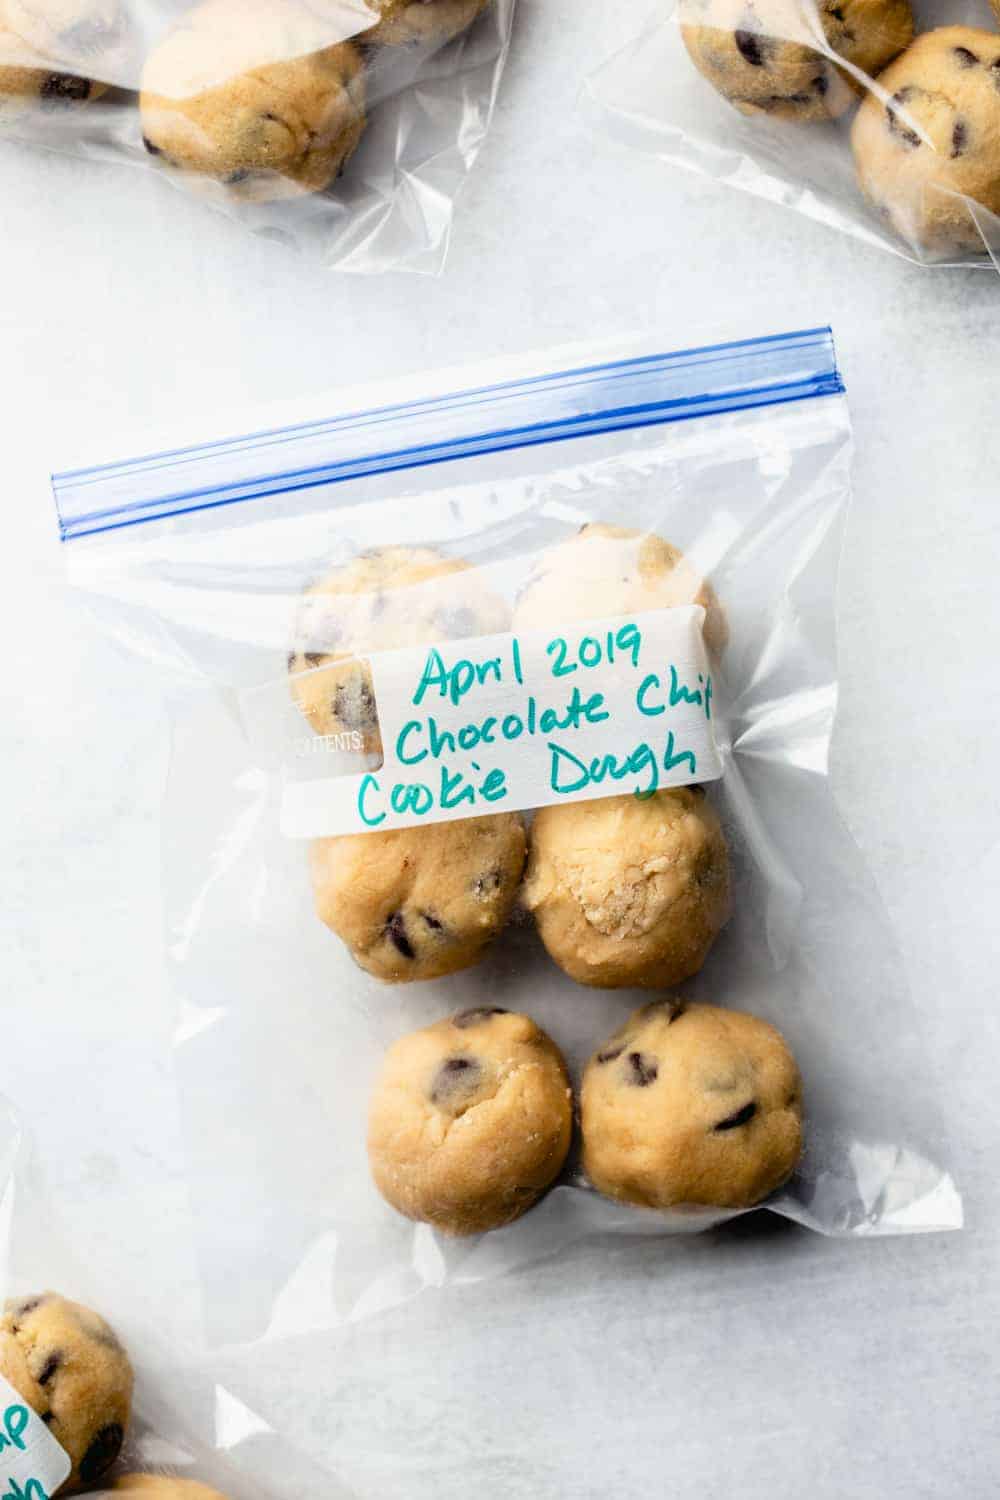 Learn how to freeze cookie dough in just a few simple steps for warm cookies any time